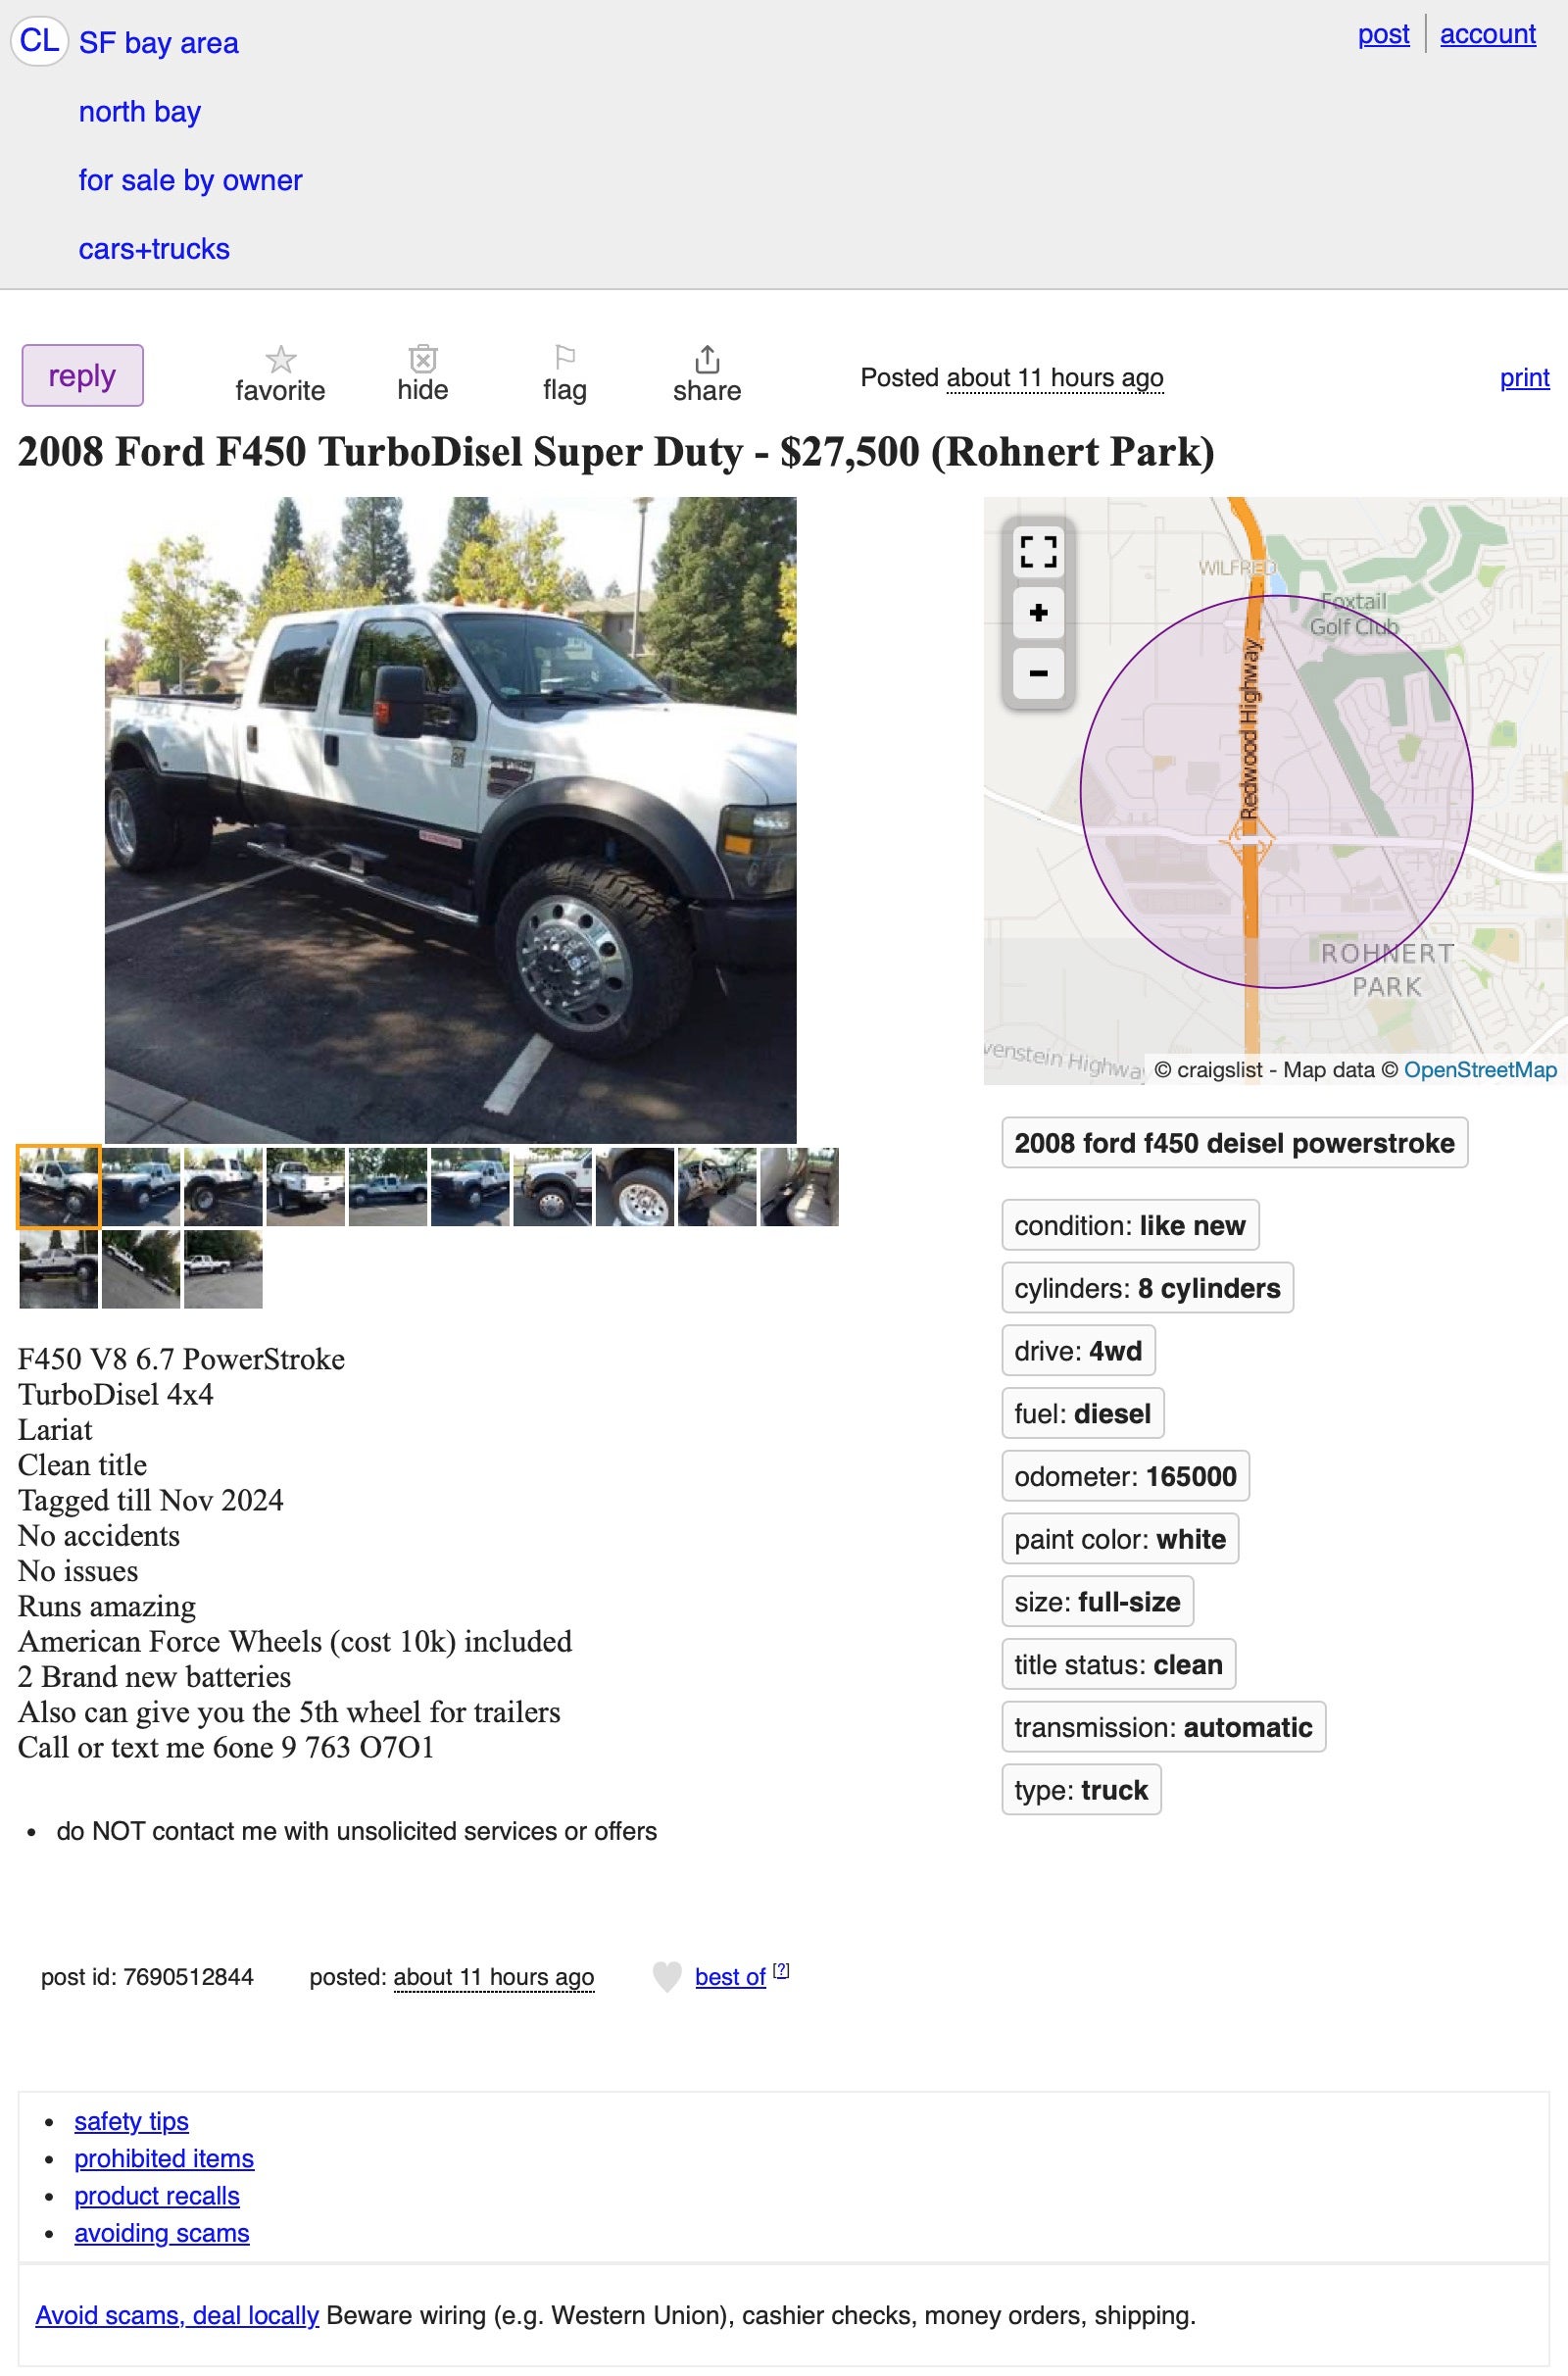 at $27,500, is this 2008 ford f450 super duty a super big deal?